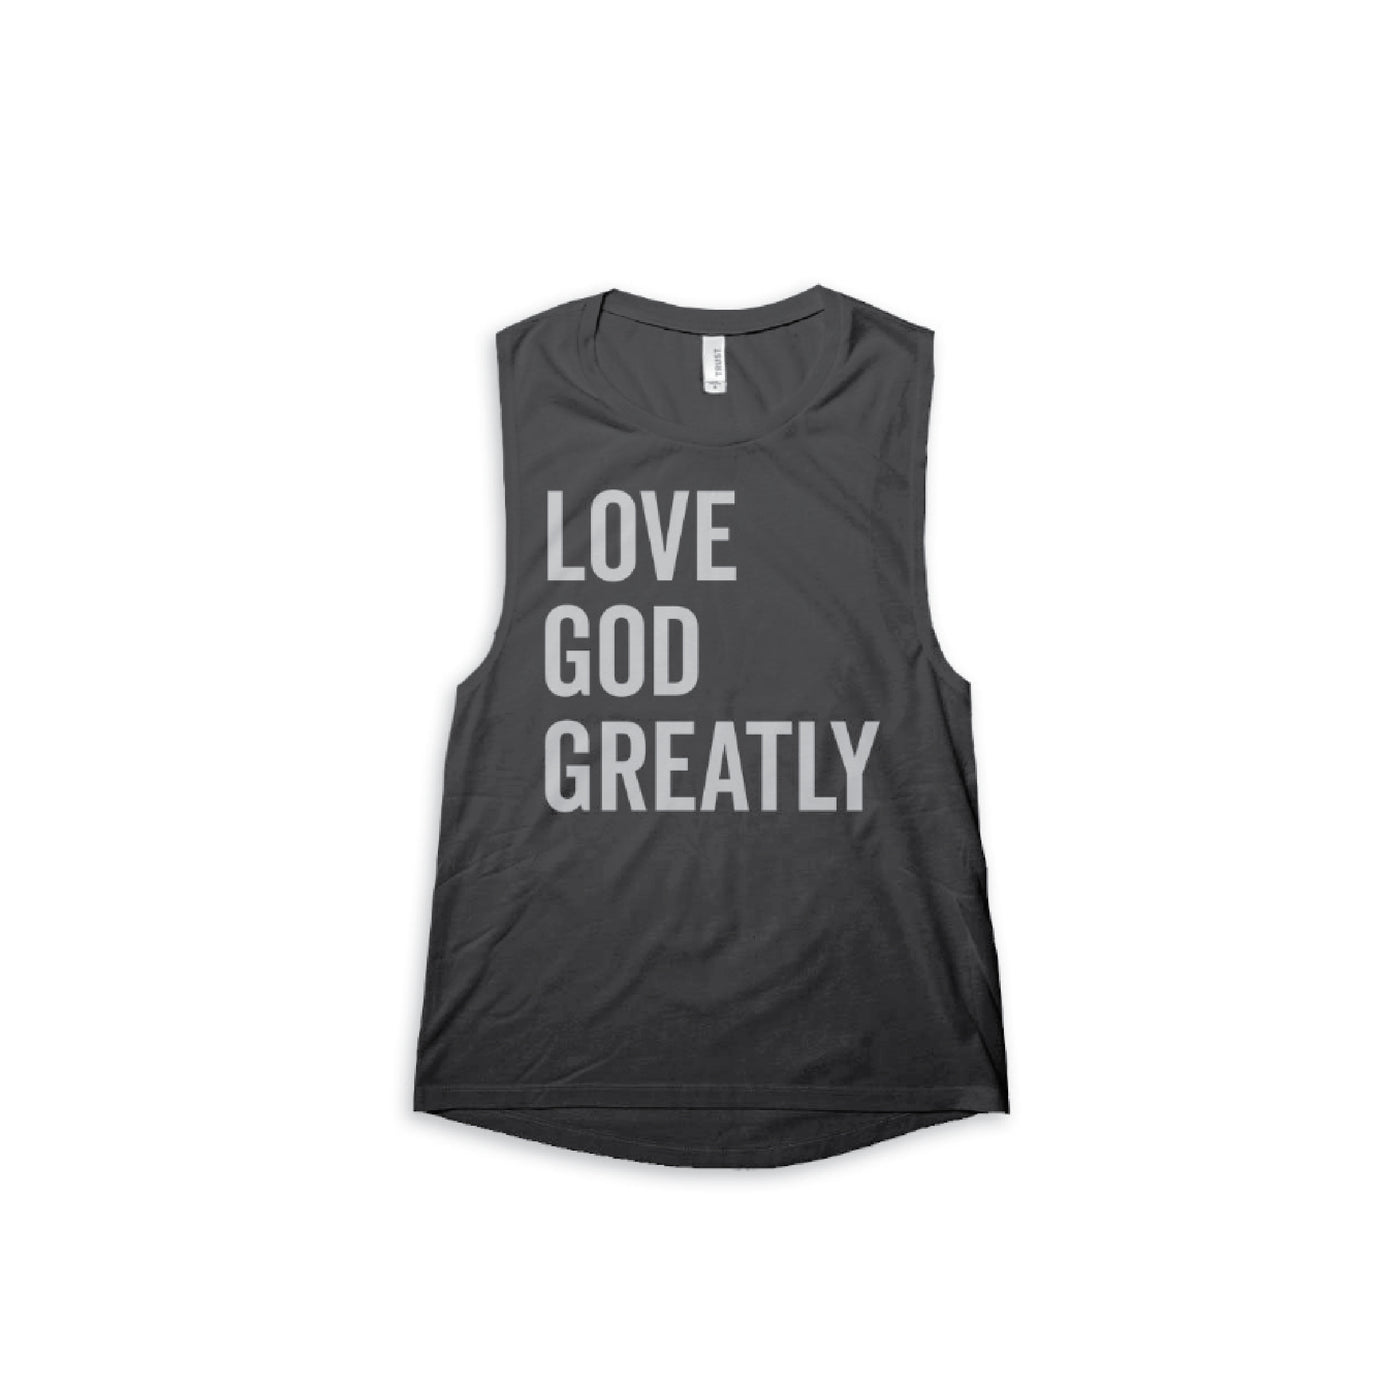 Love God Greatly Tank Top - Large Letters